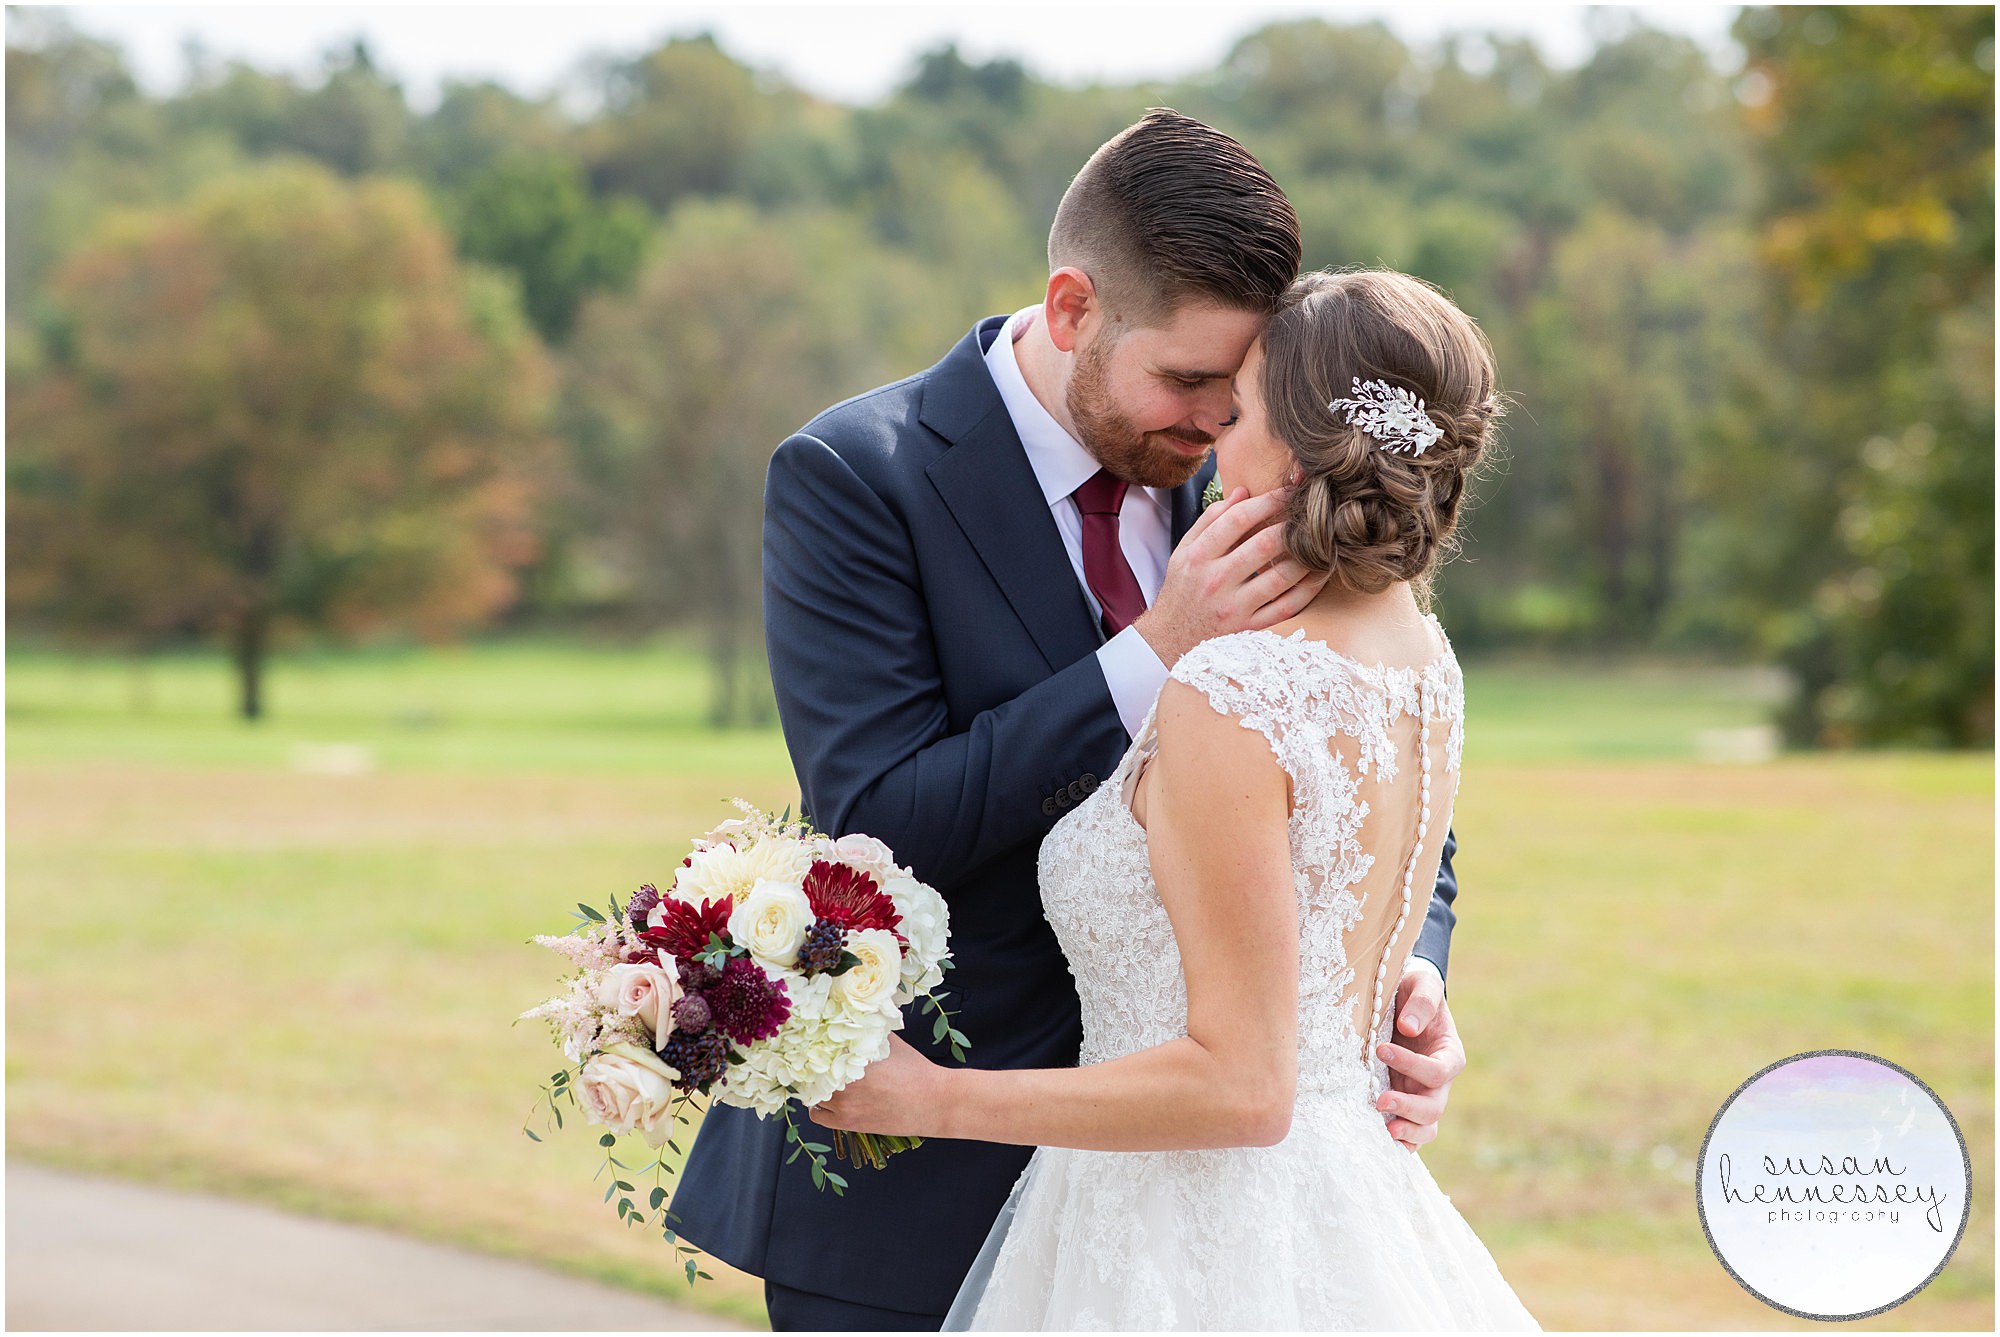 Romantic Fall Wedding at Old York Country Club